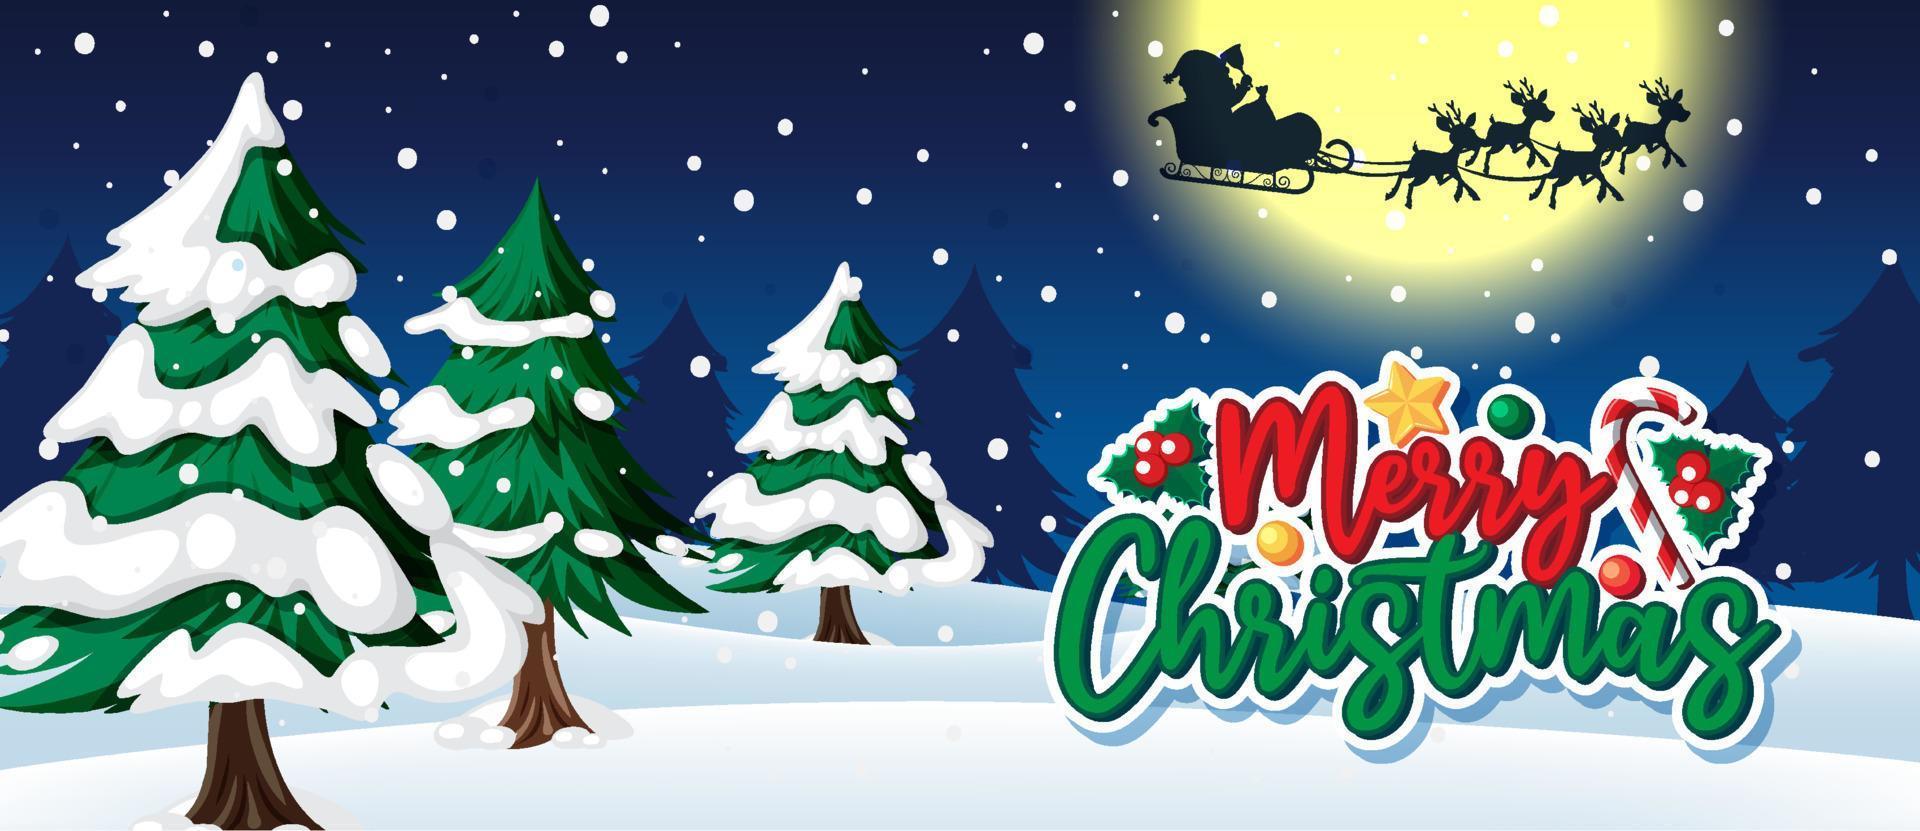 Merry Christmas banner with Snow falling at night vector